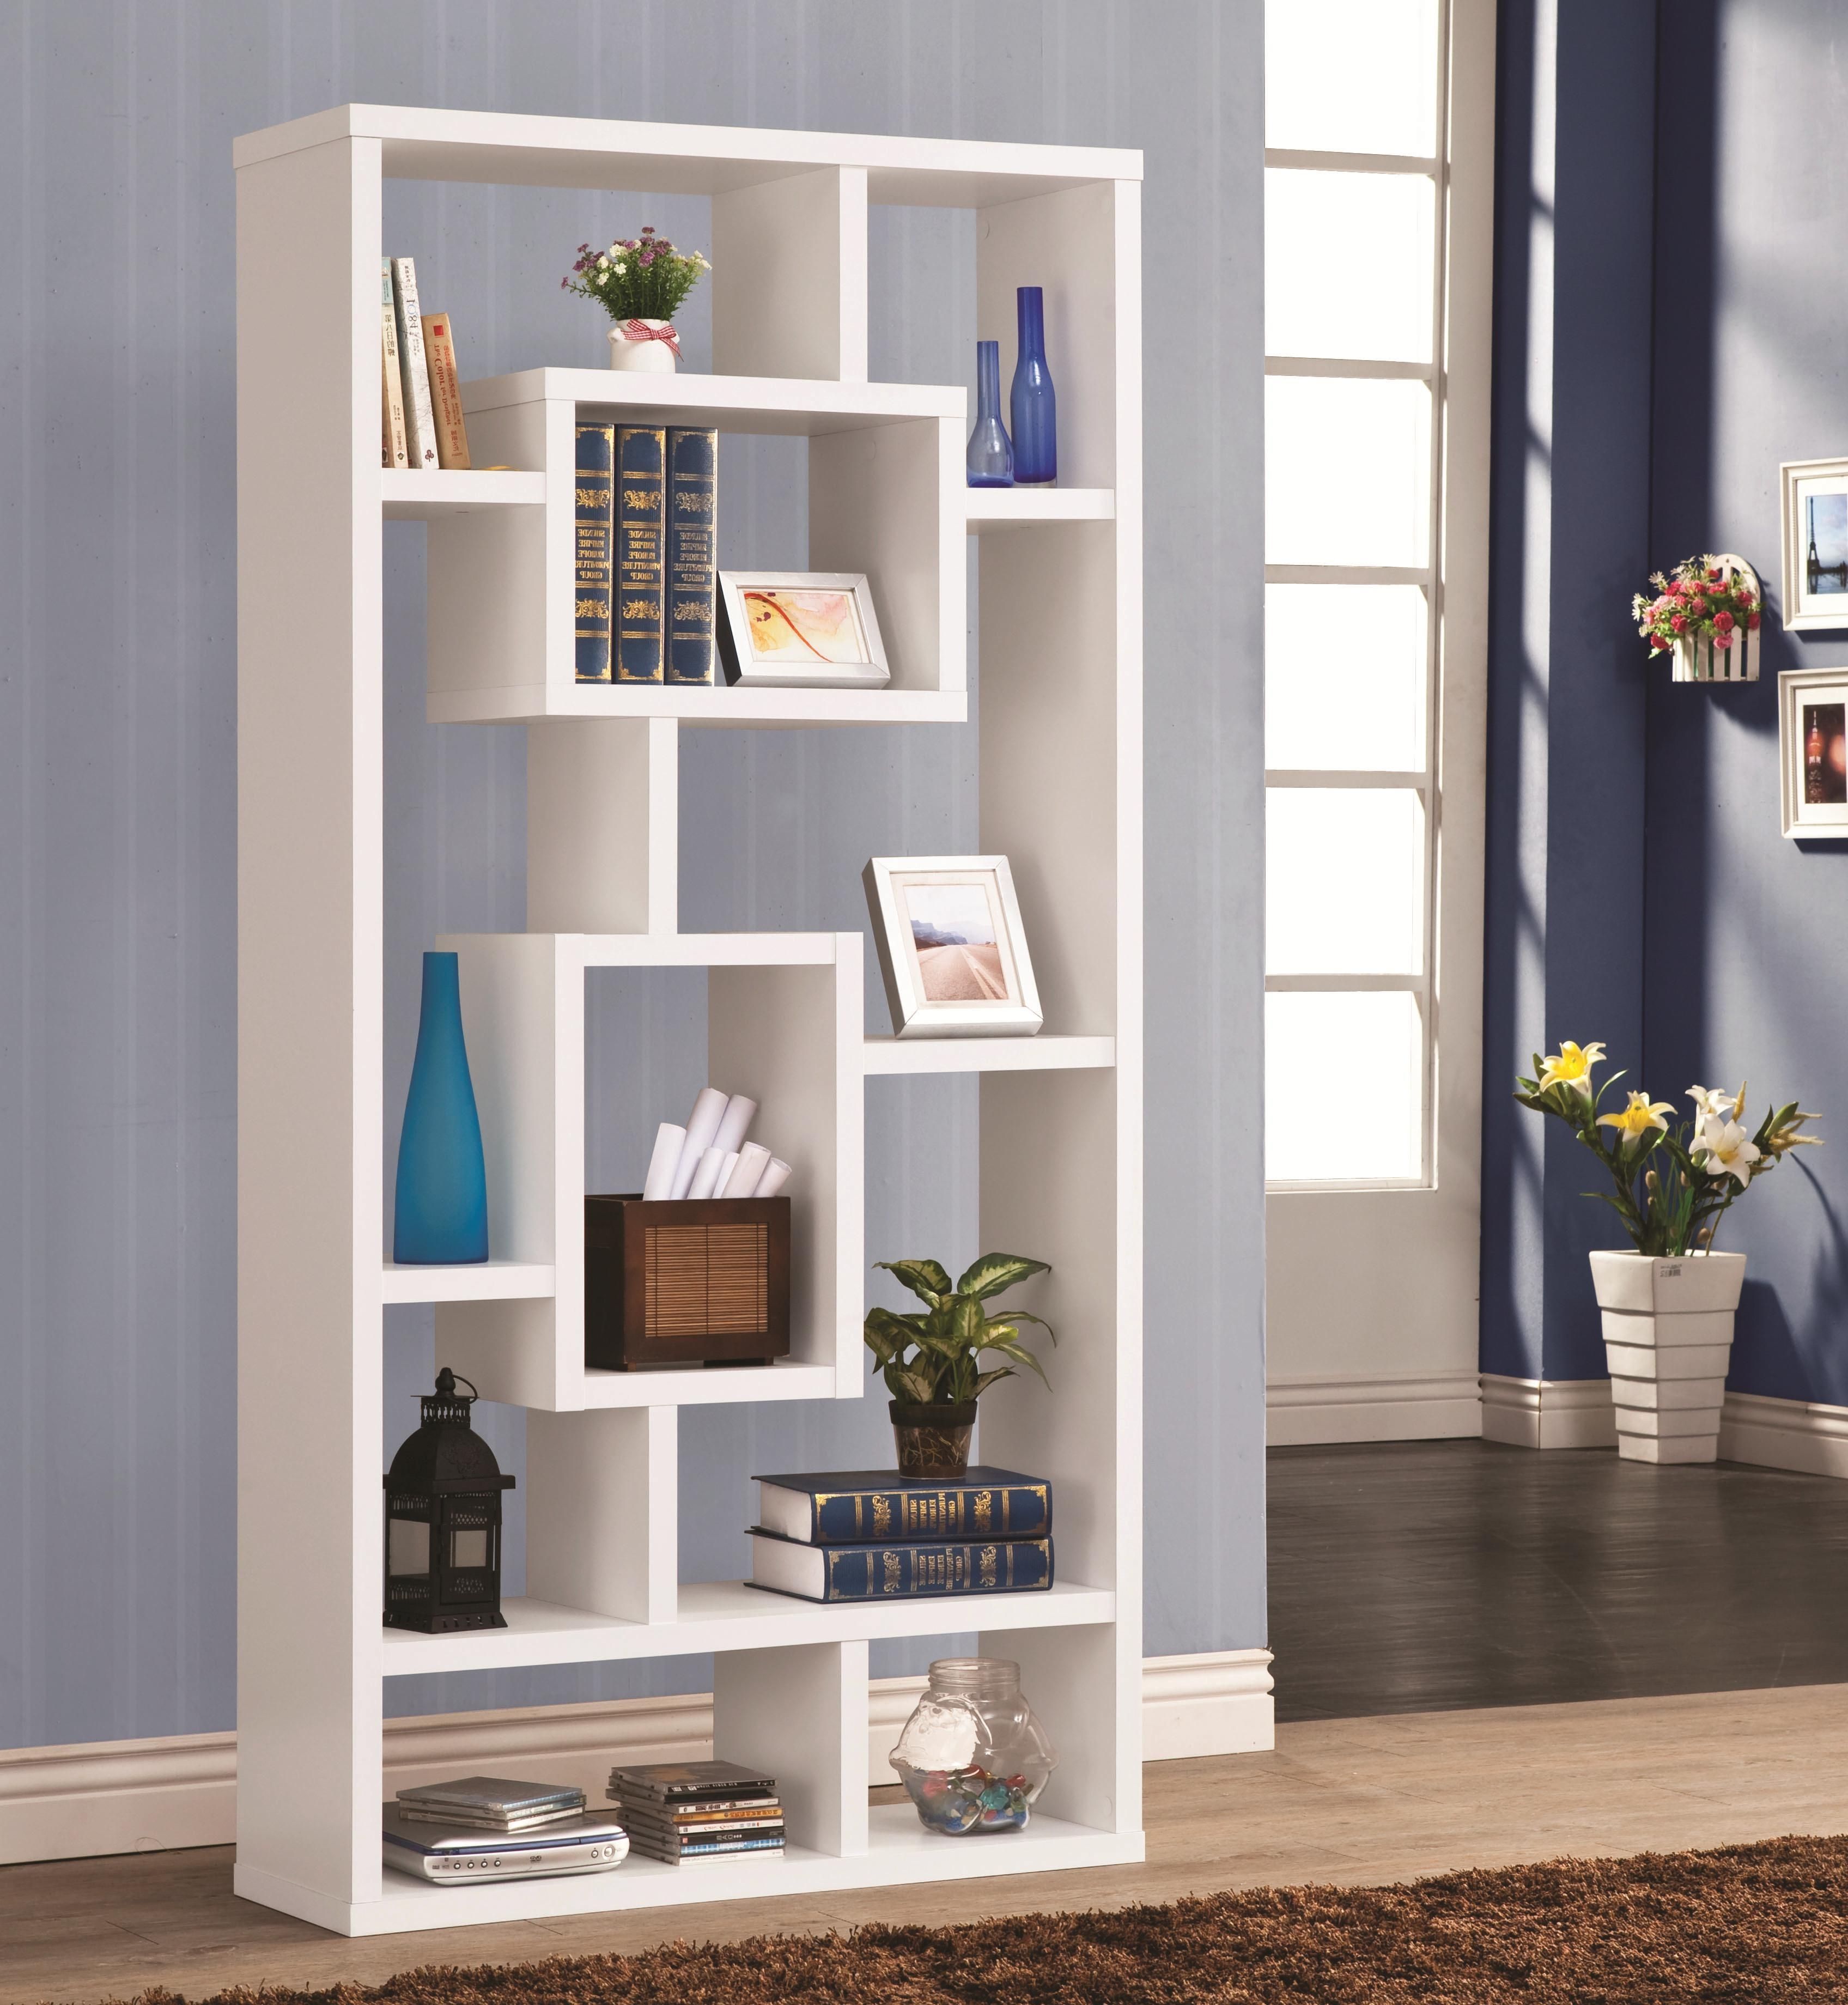 Target White Bookcases In Well Known Wall Units: Cool Bookshelf White Target White Shelving Unit (View 14 of 15)